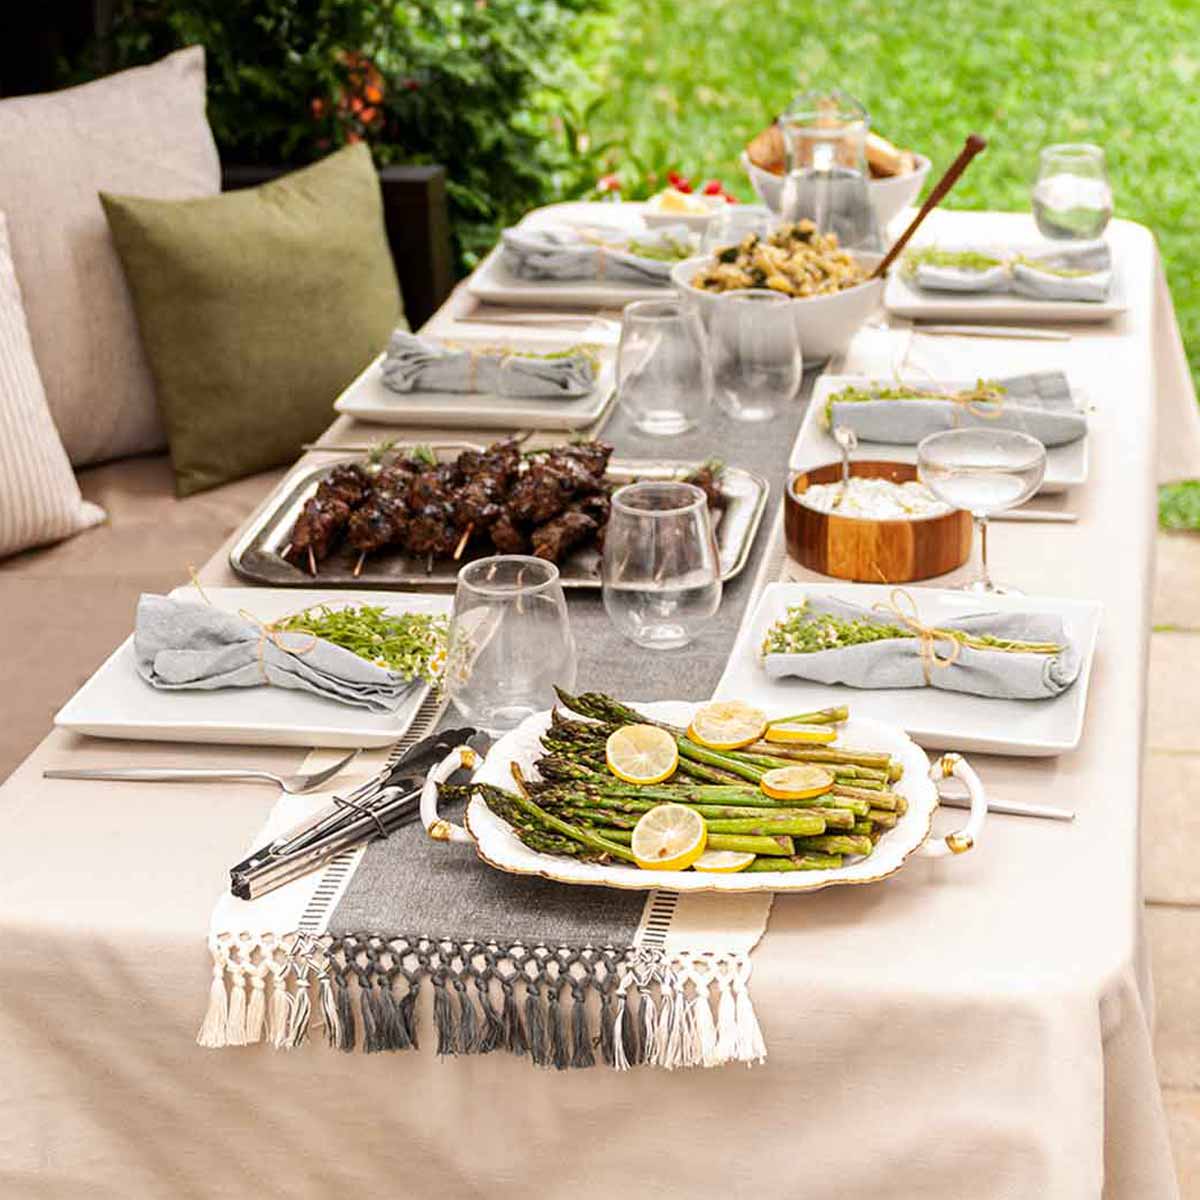 A table in a back yard garden with seasonal food on the table cloth of a table.